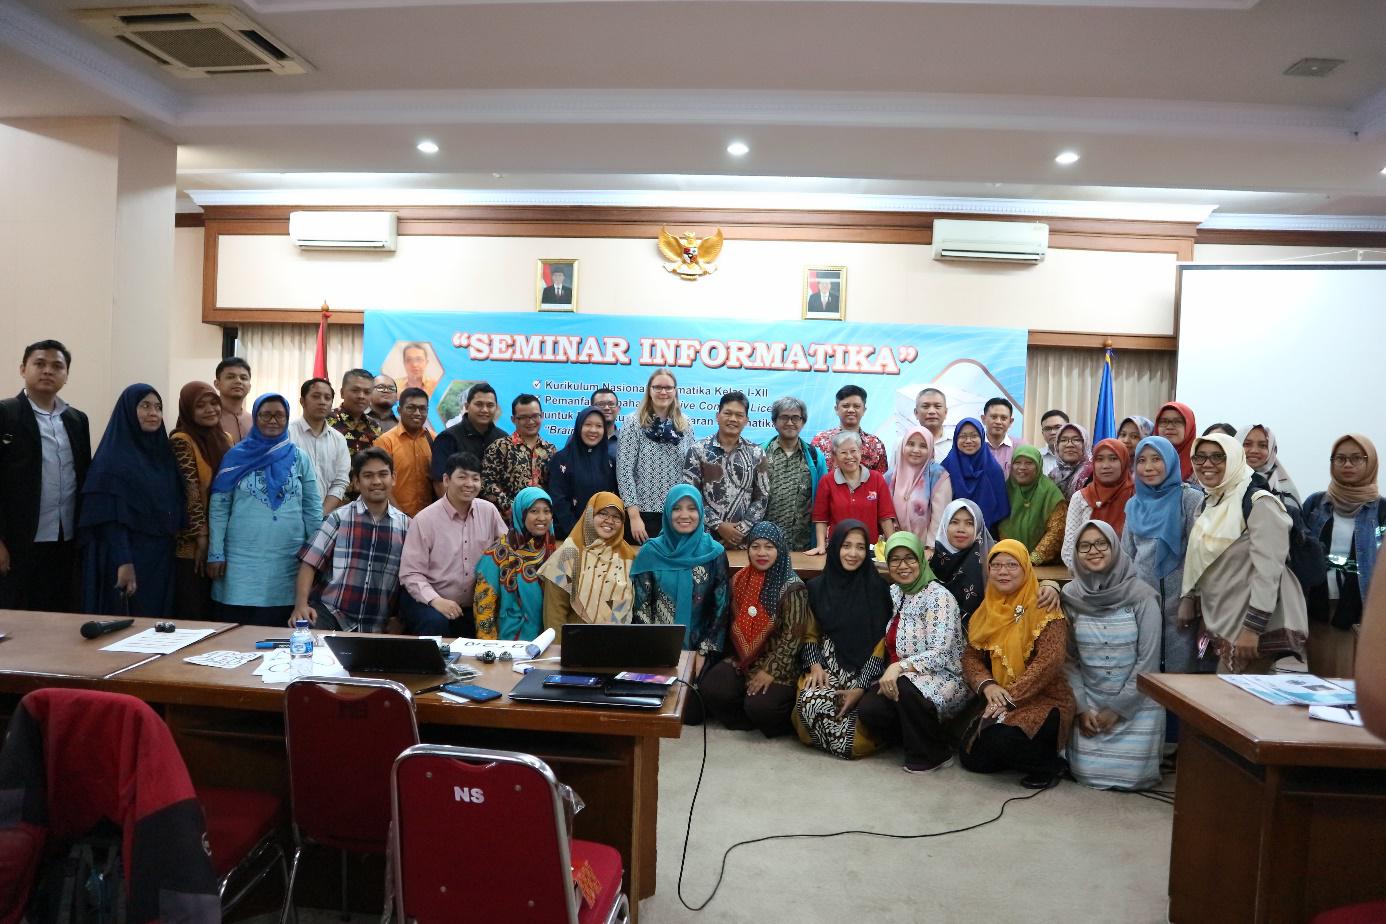 Participants of the Seminar at the Center of Curriculum development and books, Indonesian Ministry of Education in Jakarta, Indonesia